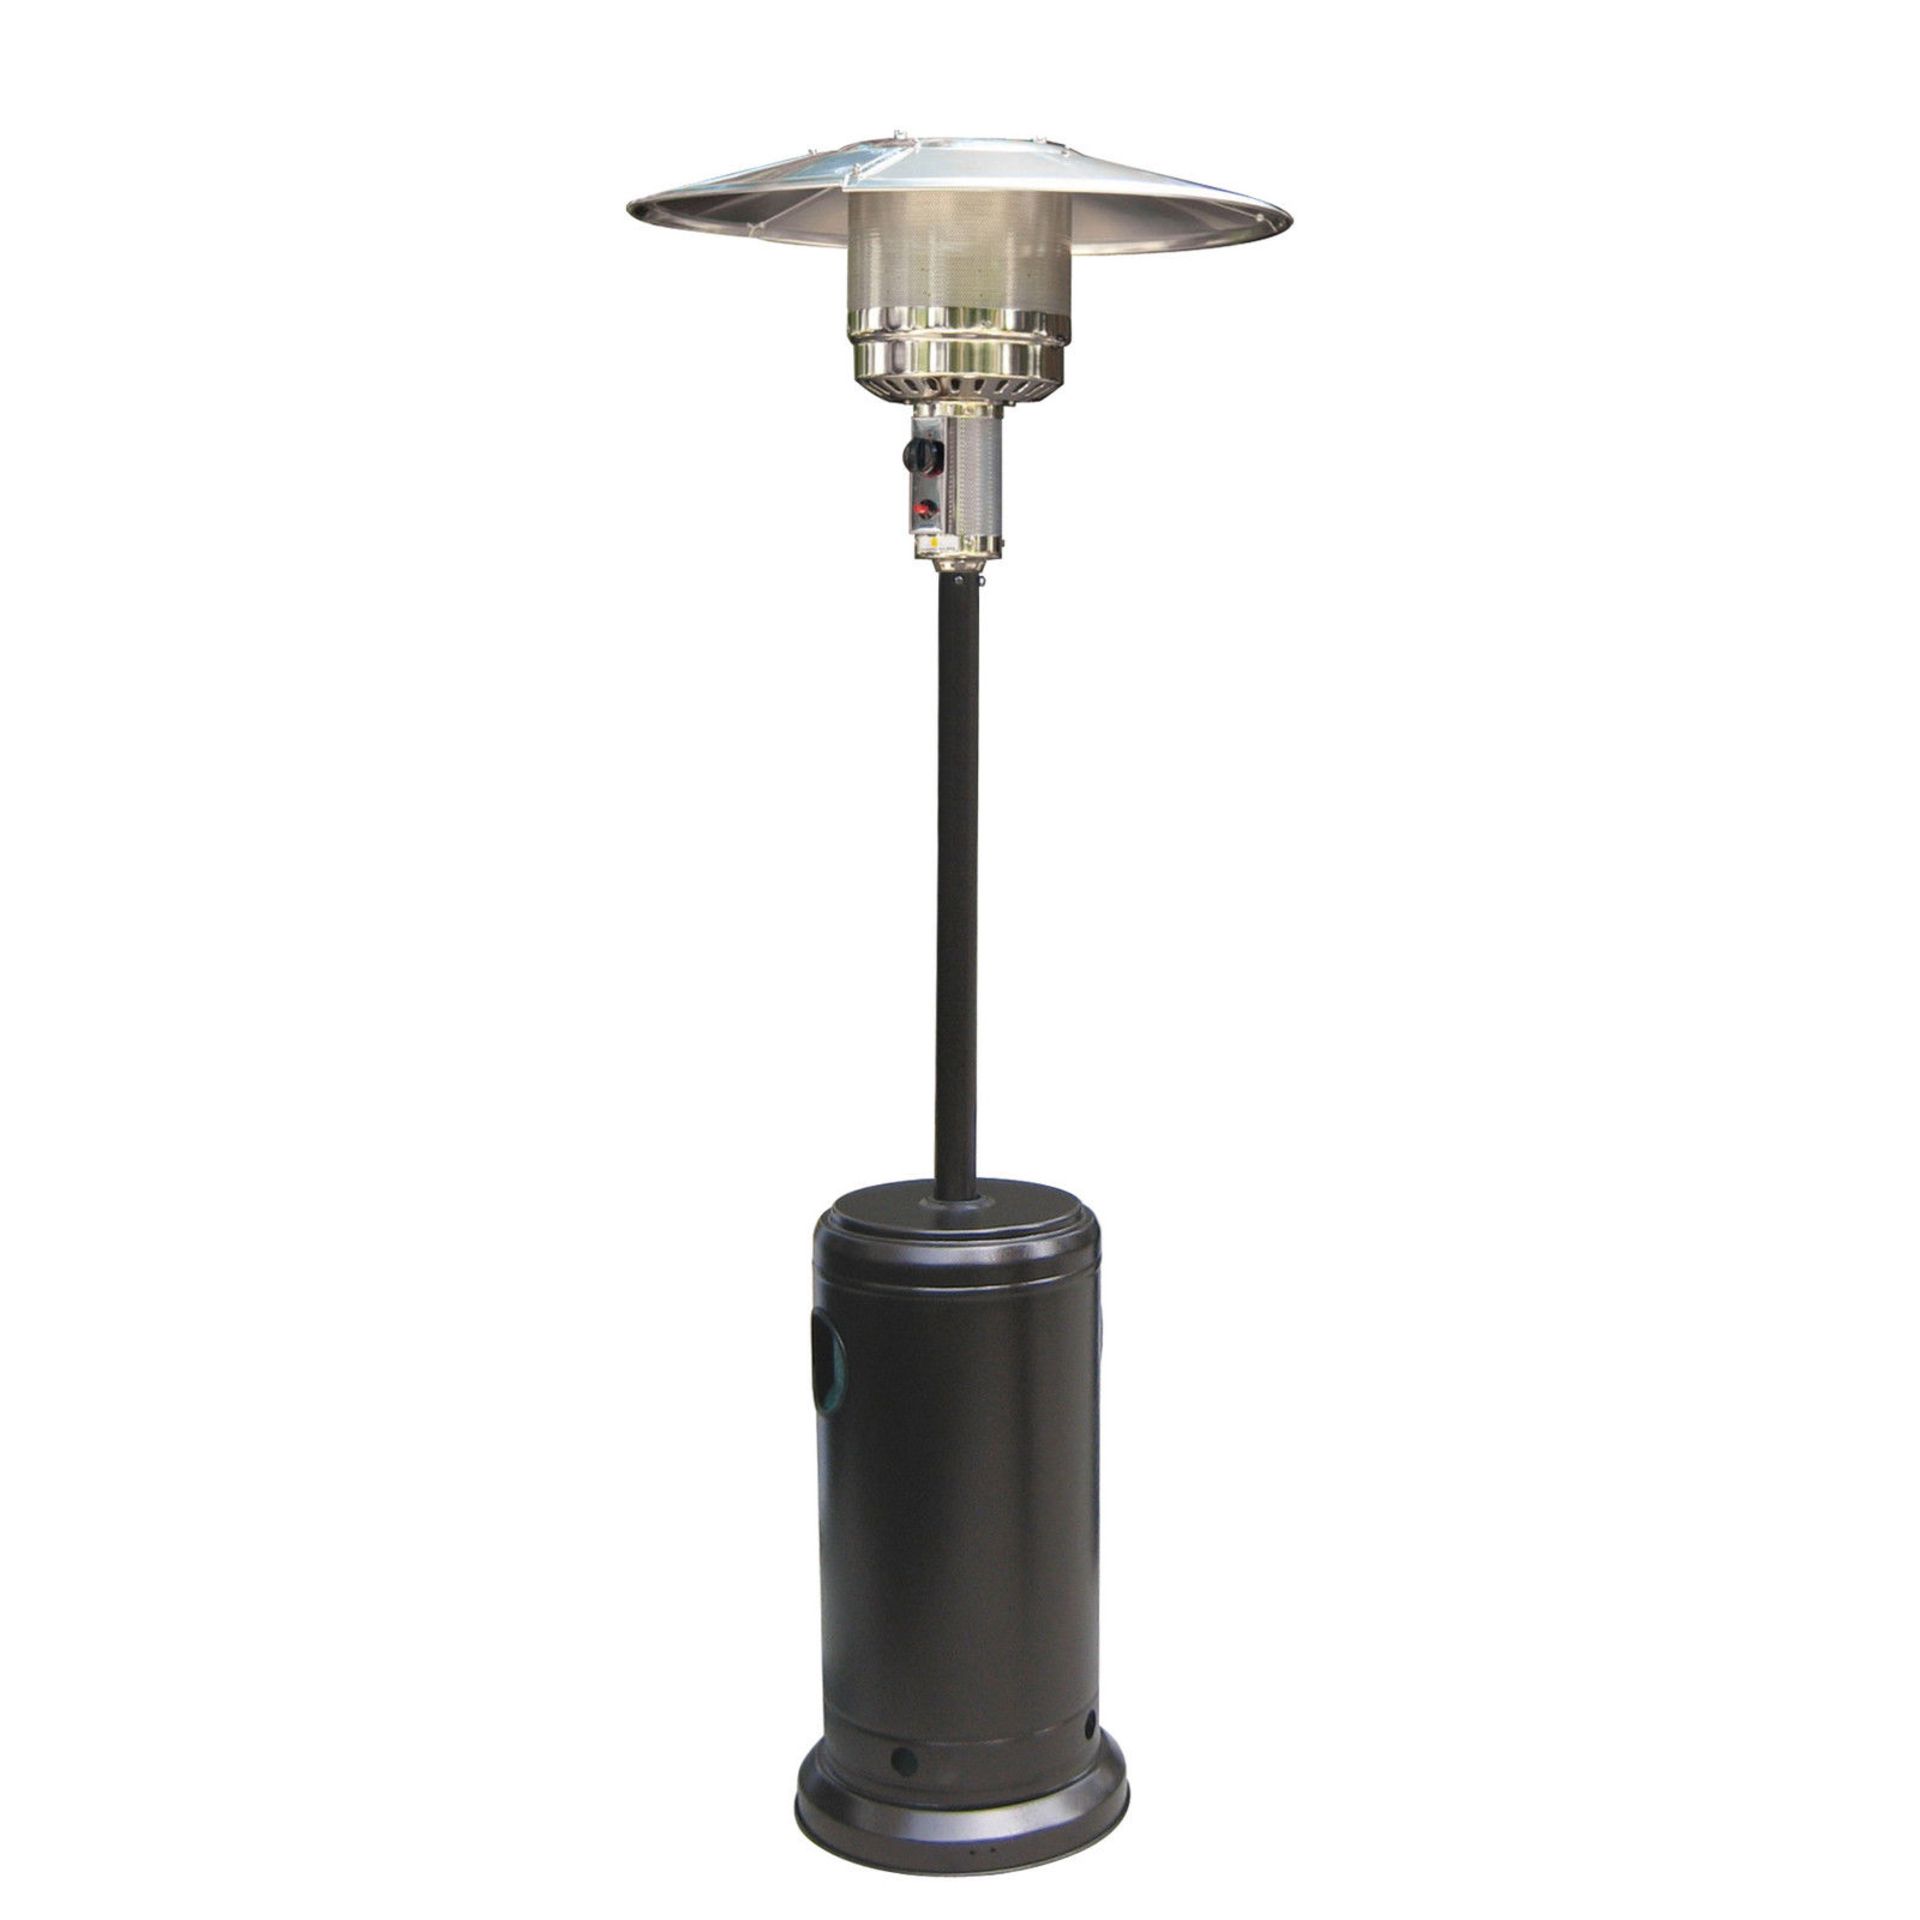 Outdoor patio heater SILVER, Material: steel with powder coated, Certifcation: CE Base: Dis.